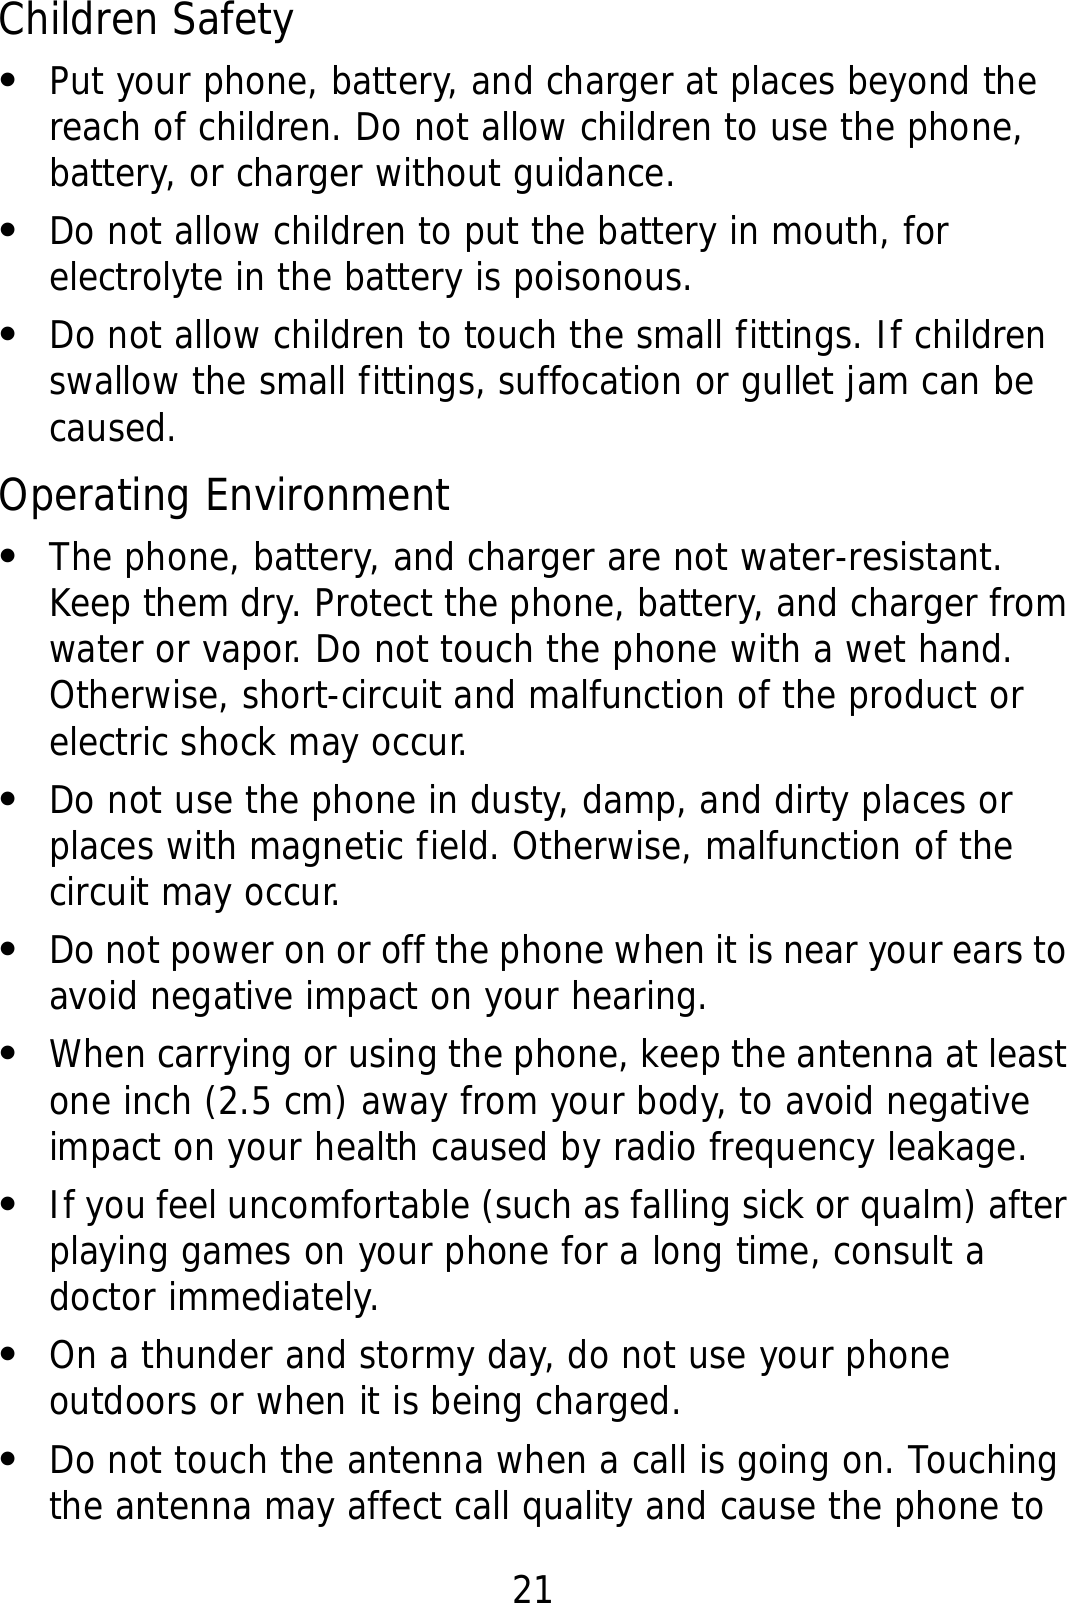 21 Children Safety z Put your phone, battery, and charger at places beyond the reach of children. Do not allow children to use the phone, battery, or charger without guidance. z Do not allow children to put the battery in mouth, for electrolyte in the battery is poisonous. z Do not allow children to touch the small fittings. If children swallow the small fittings, suffocation or gullet jam can be caused. Operating Environment z The phone, battery, and charger are not water-resistant. Keep them dry. Protect the phone, battery, and charger from water or vapor. Do not touch the phone with a wet hand. Otherwise, short-circuit and malfunction of the product or electric shock may occur. z Do not use the phone in dusty, damp, and dirty places or places with magnetic field. Otherwise, malfunction of the circuit may occur. z Do not power on or off the phone when it is near your ears to avoid negative impact on your hearing. z When carrying or using the phone, keep the antenna at least one inch (2.5 cm) away from your body, to avoid negative impact on your health caused by radio frequency leakage. z If you feel uncomfortable (such as falling sick or qualm) after playing games on your phone for a long time, consult a doctor immediately. z On a thunder and stormy day, do not use your phone outdoors or when it is being charged. z Do not touch the antenna when a call is going on. Touching the antenna may affect call quality and cause the phone to 